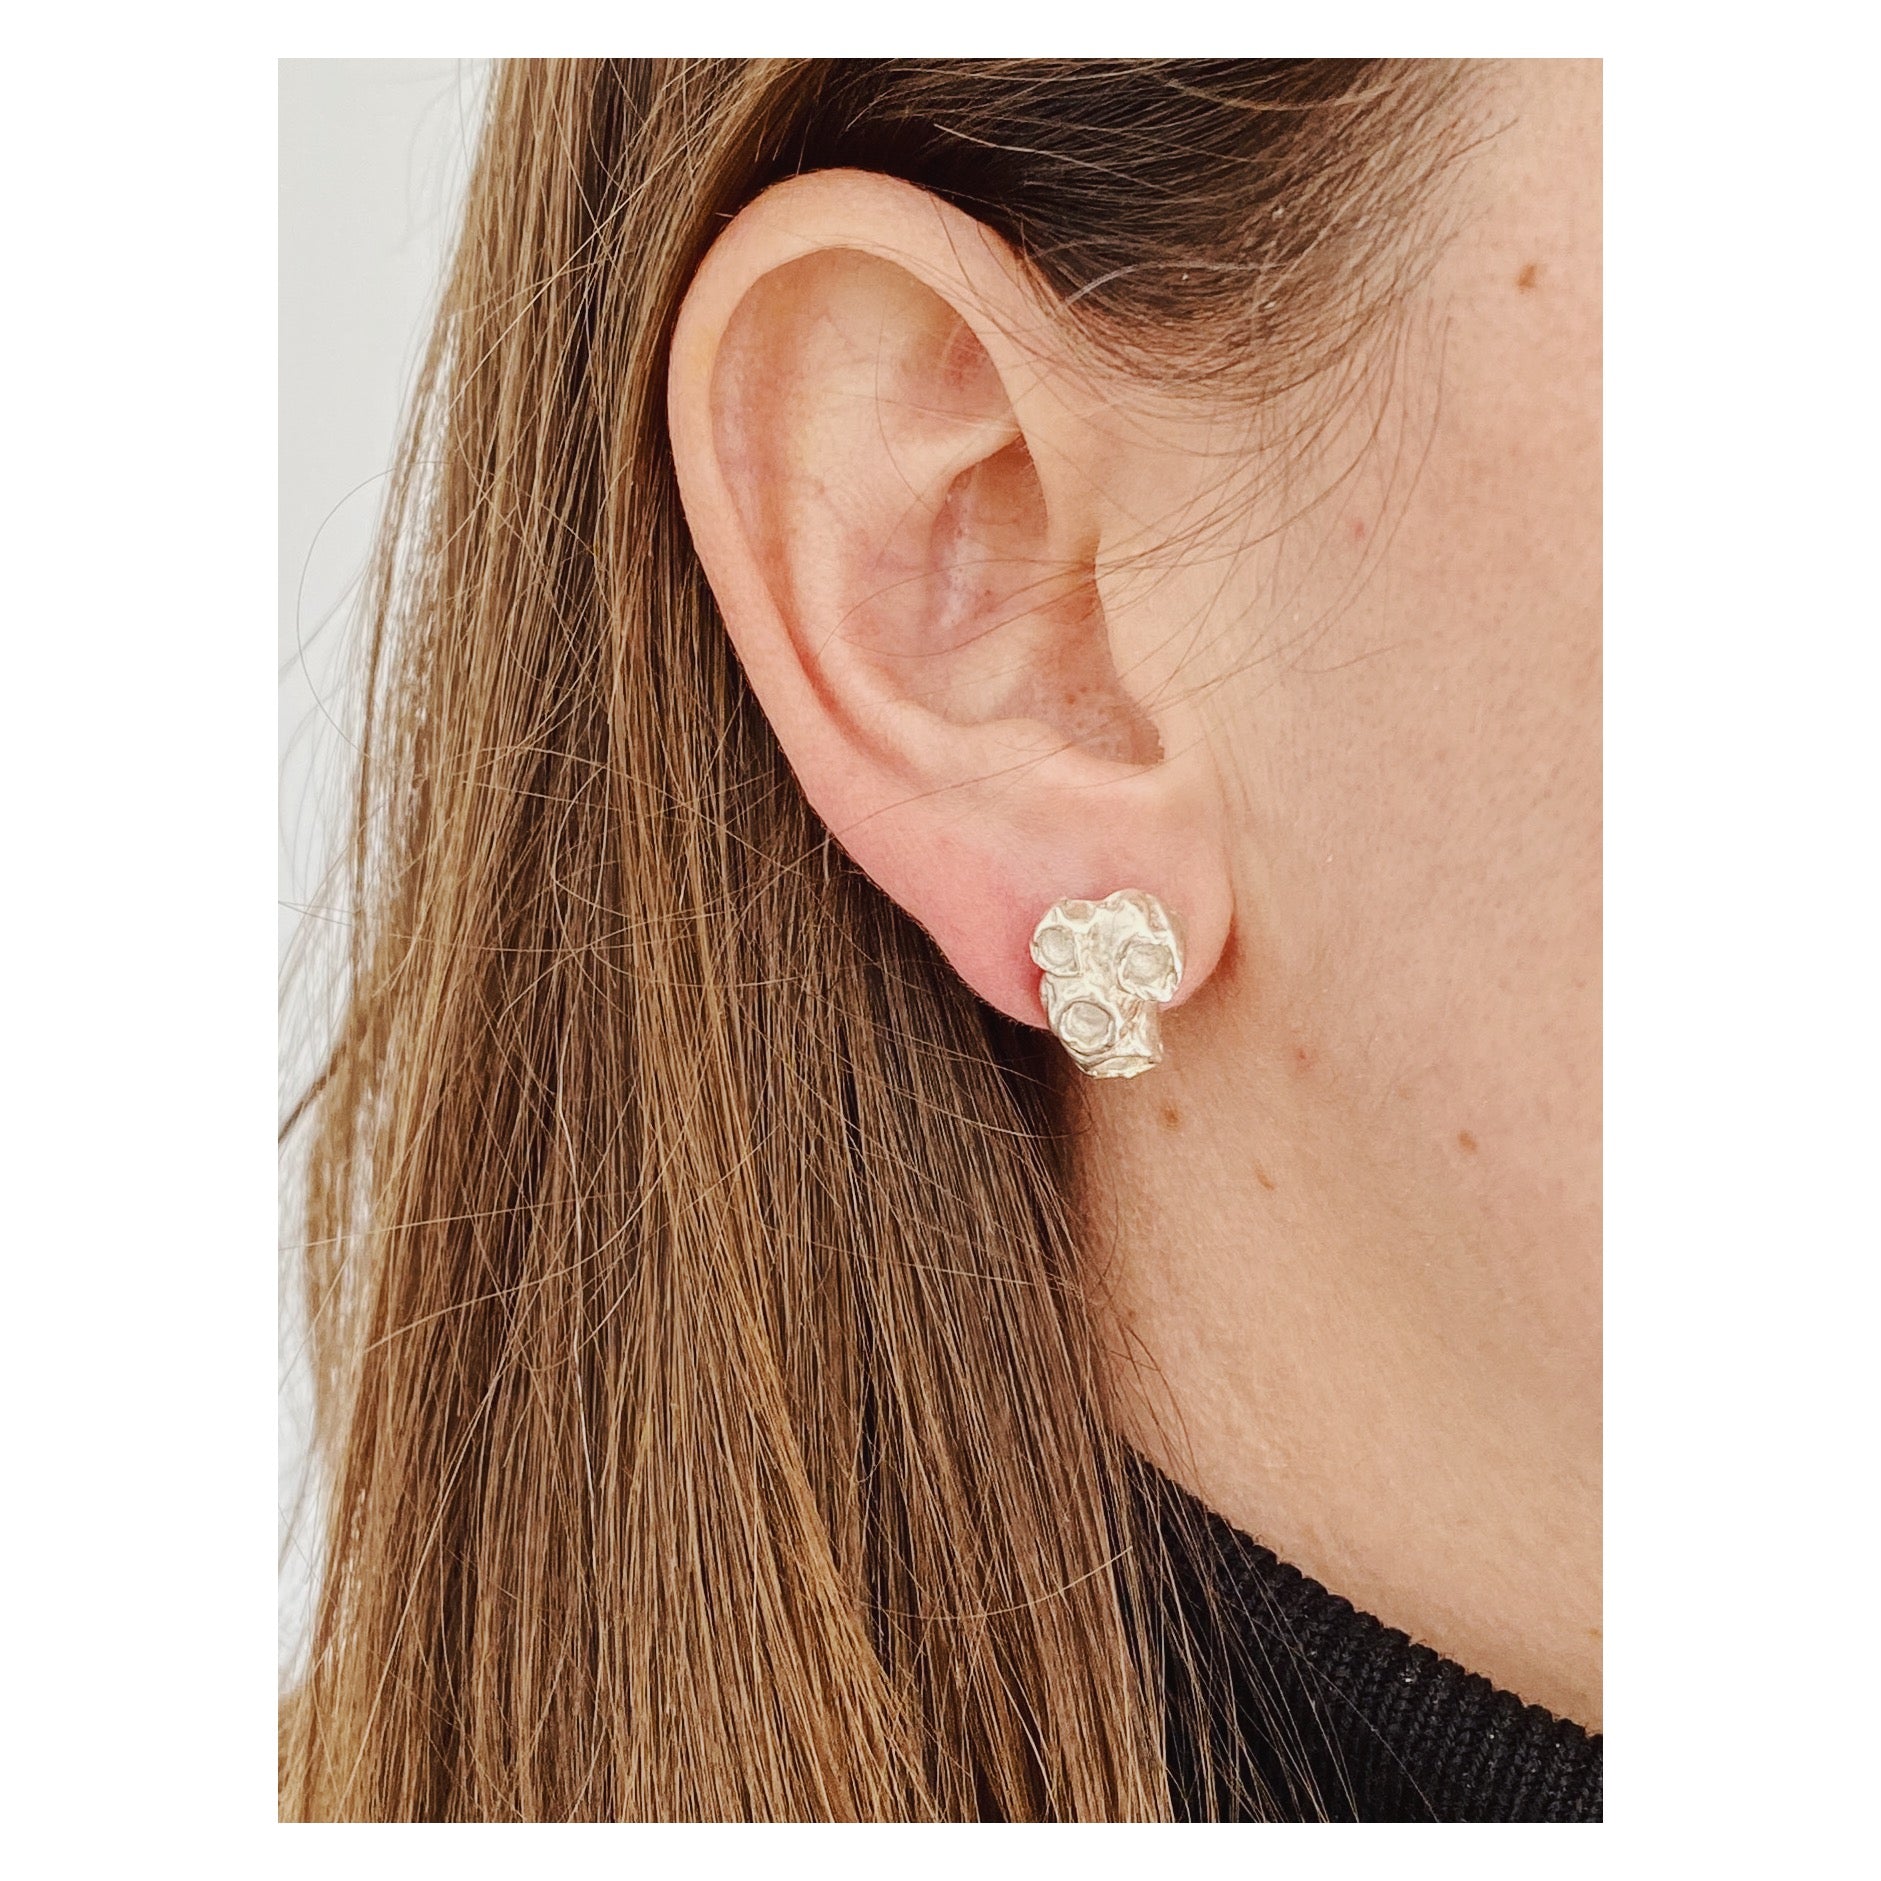 Barnacle Studs, Silver